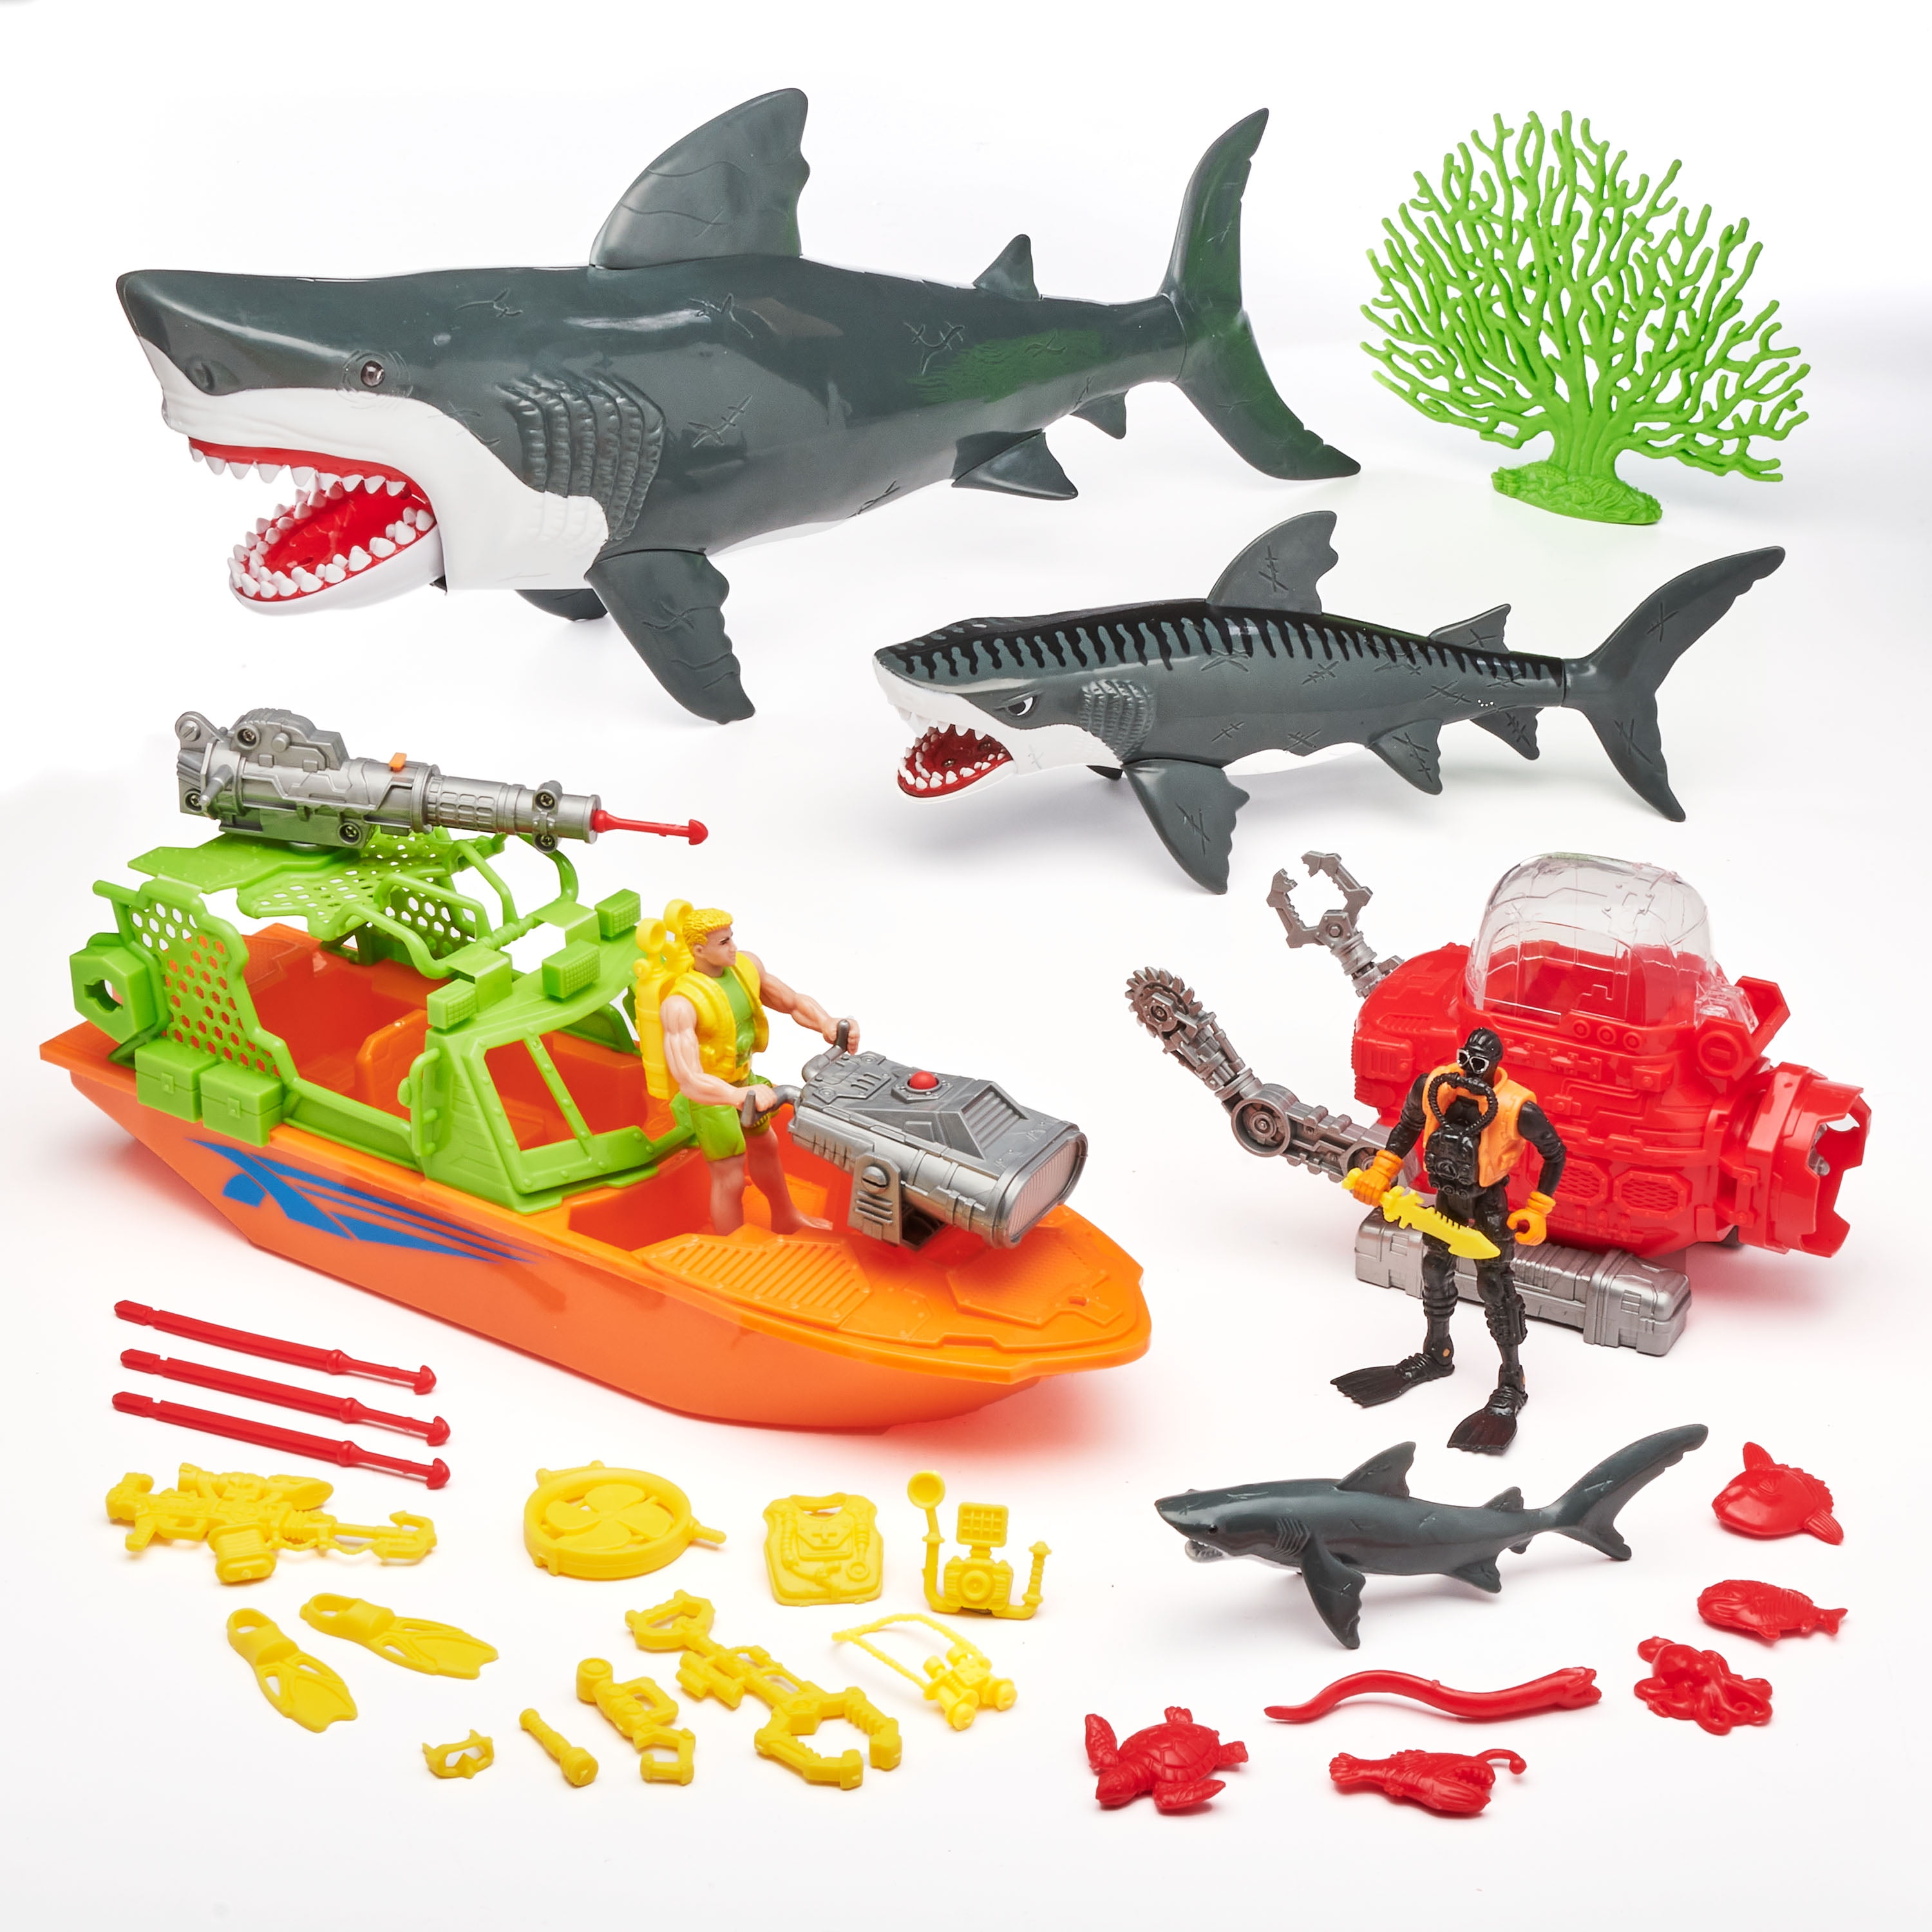 Kid Connection Shark Exploration Play Set, With Marine Boat and Vehicles, 31 Pieces